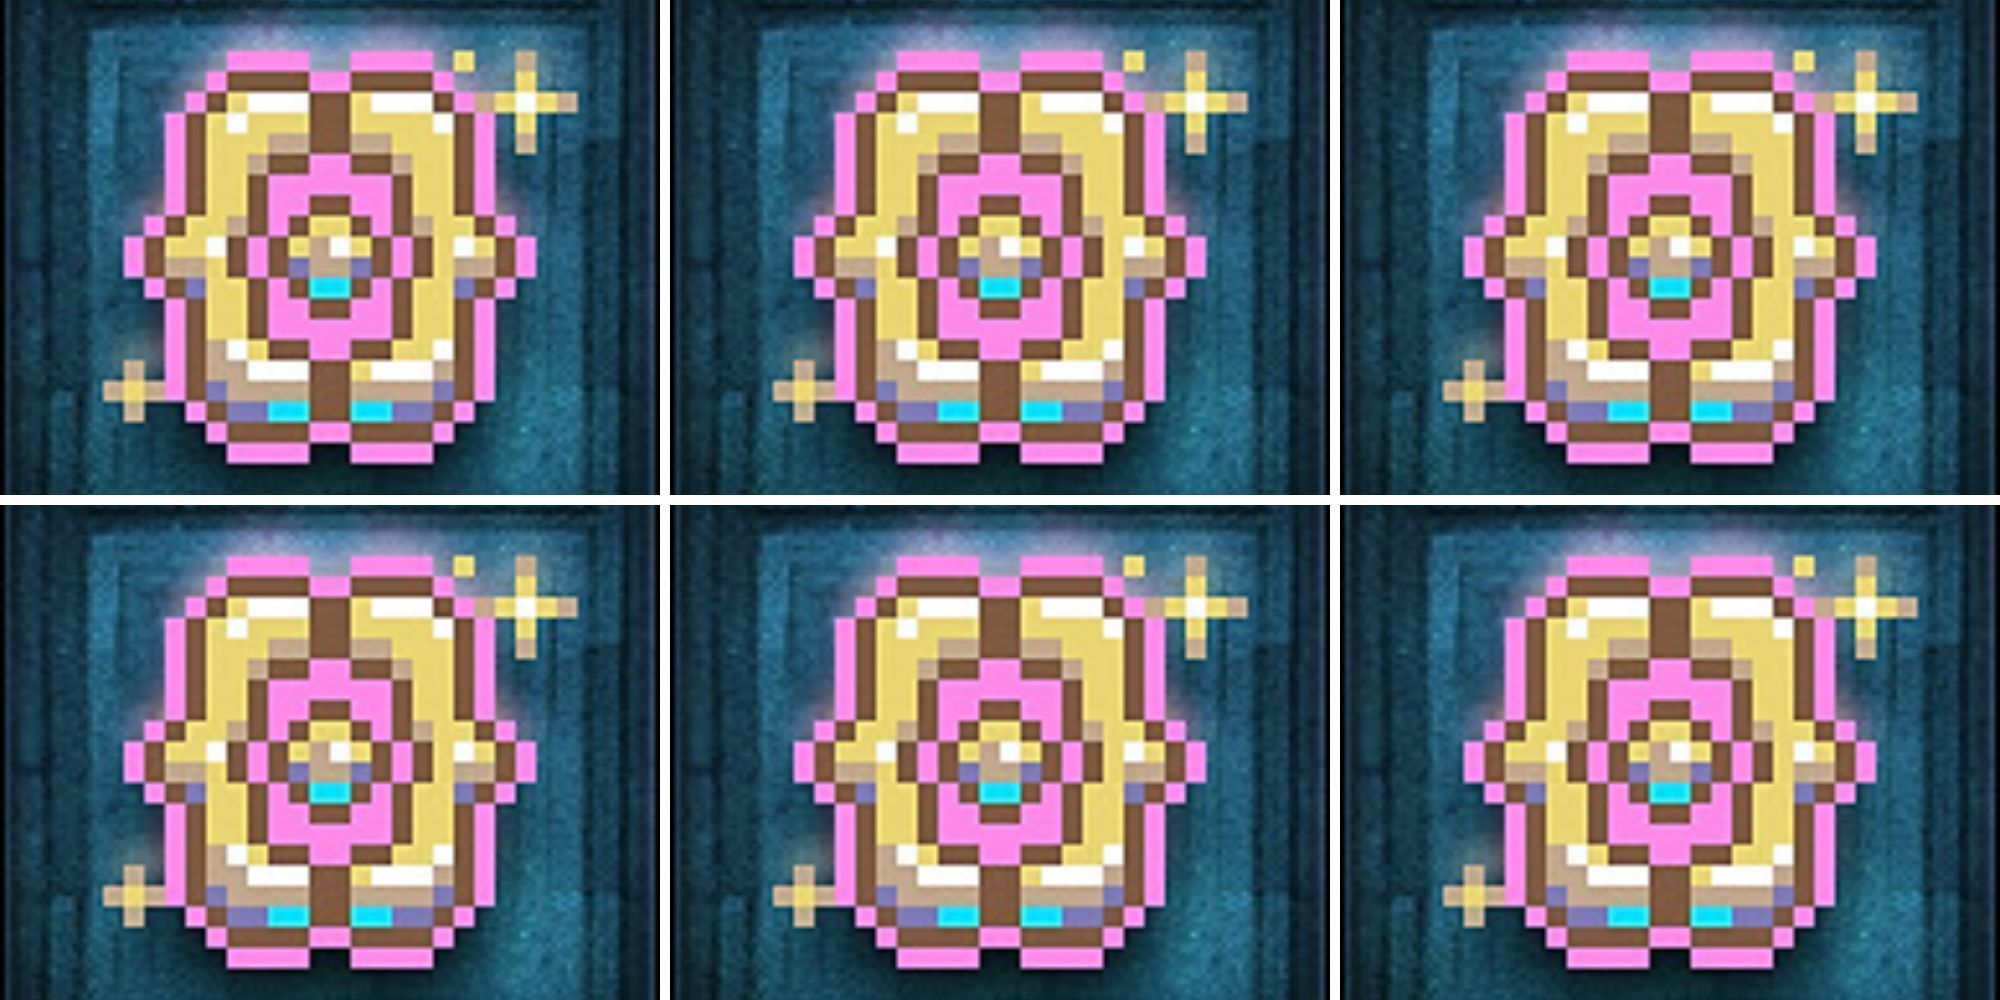 Repeating yellow and pink pattern of the Pebcake achievement icon.